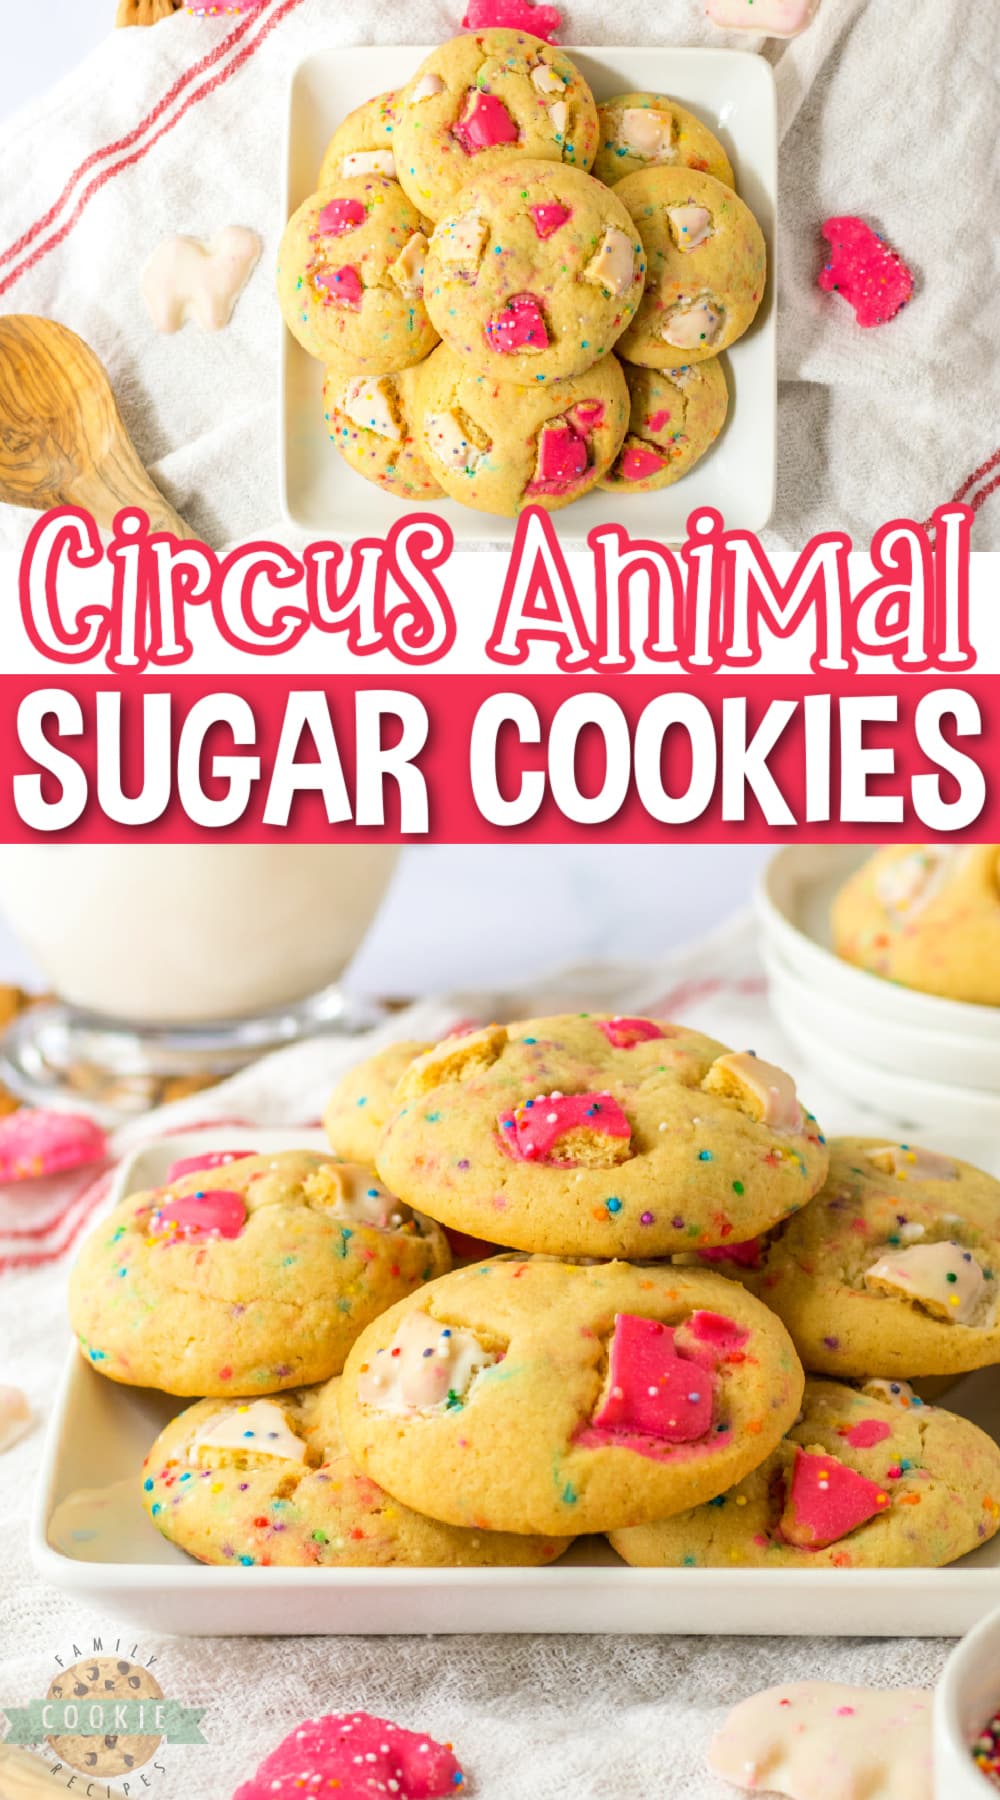 Circus Animal Sugar Cookies are a fun and whimsical twist on traditional sugar cookies. The recipe calls for basic ingredients that can be found in most kitchens, along with a few extra special additions, such as rainbow sprinkles and frosted circus animal cookies.